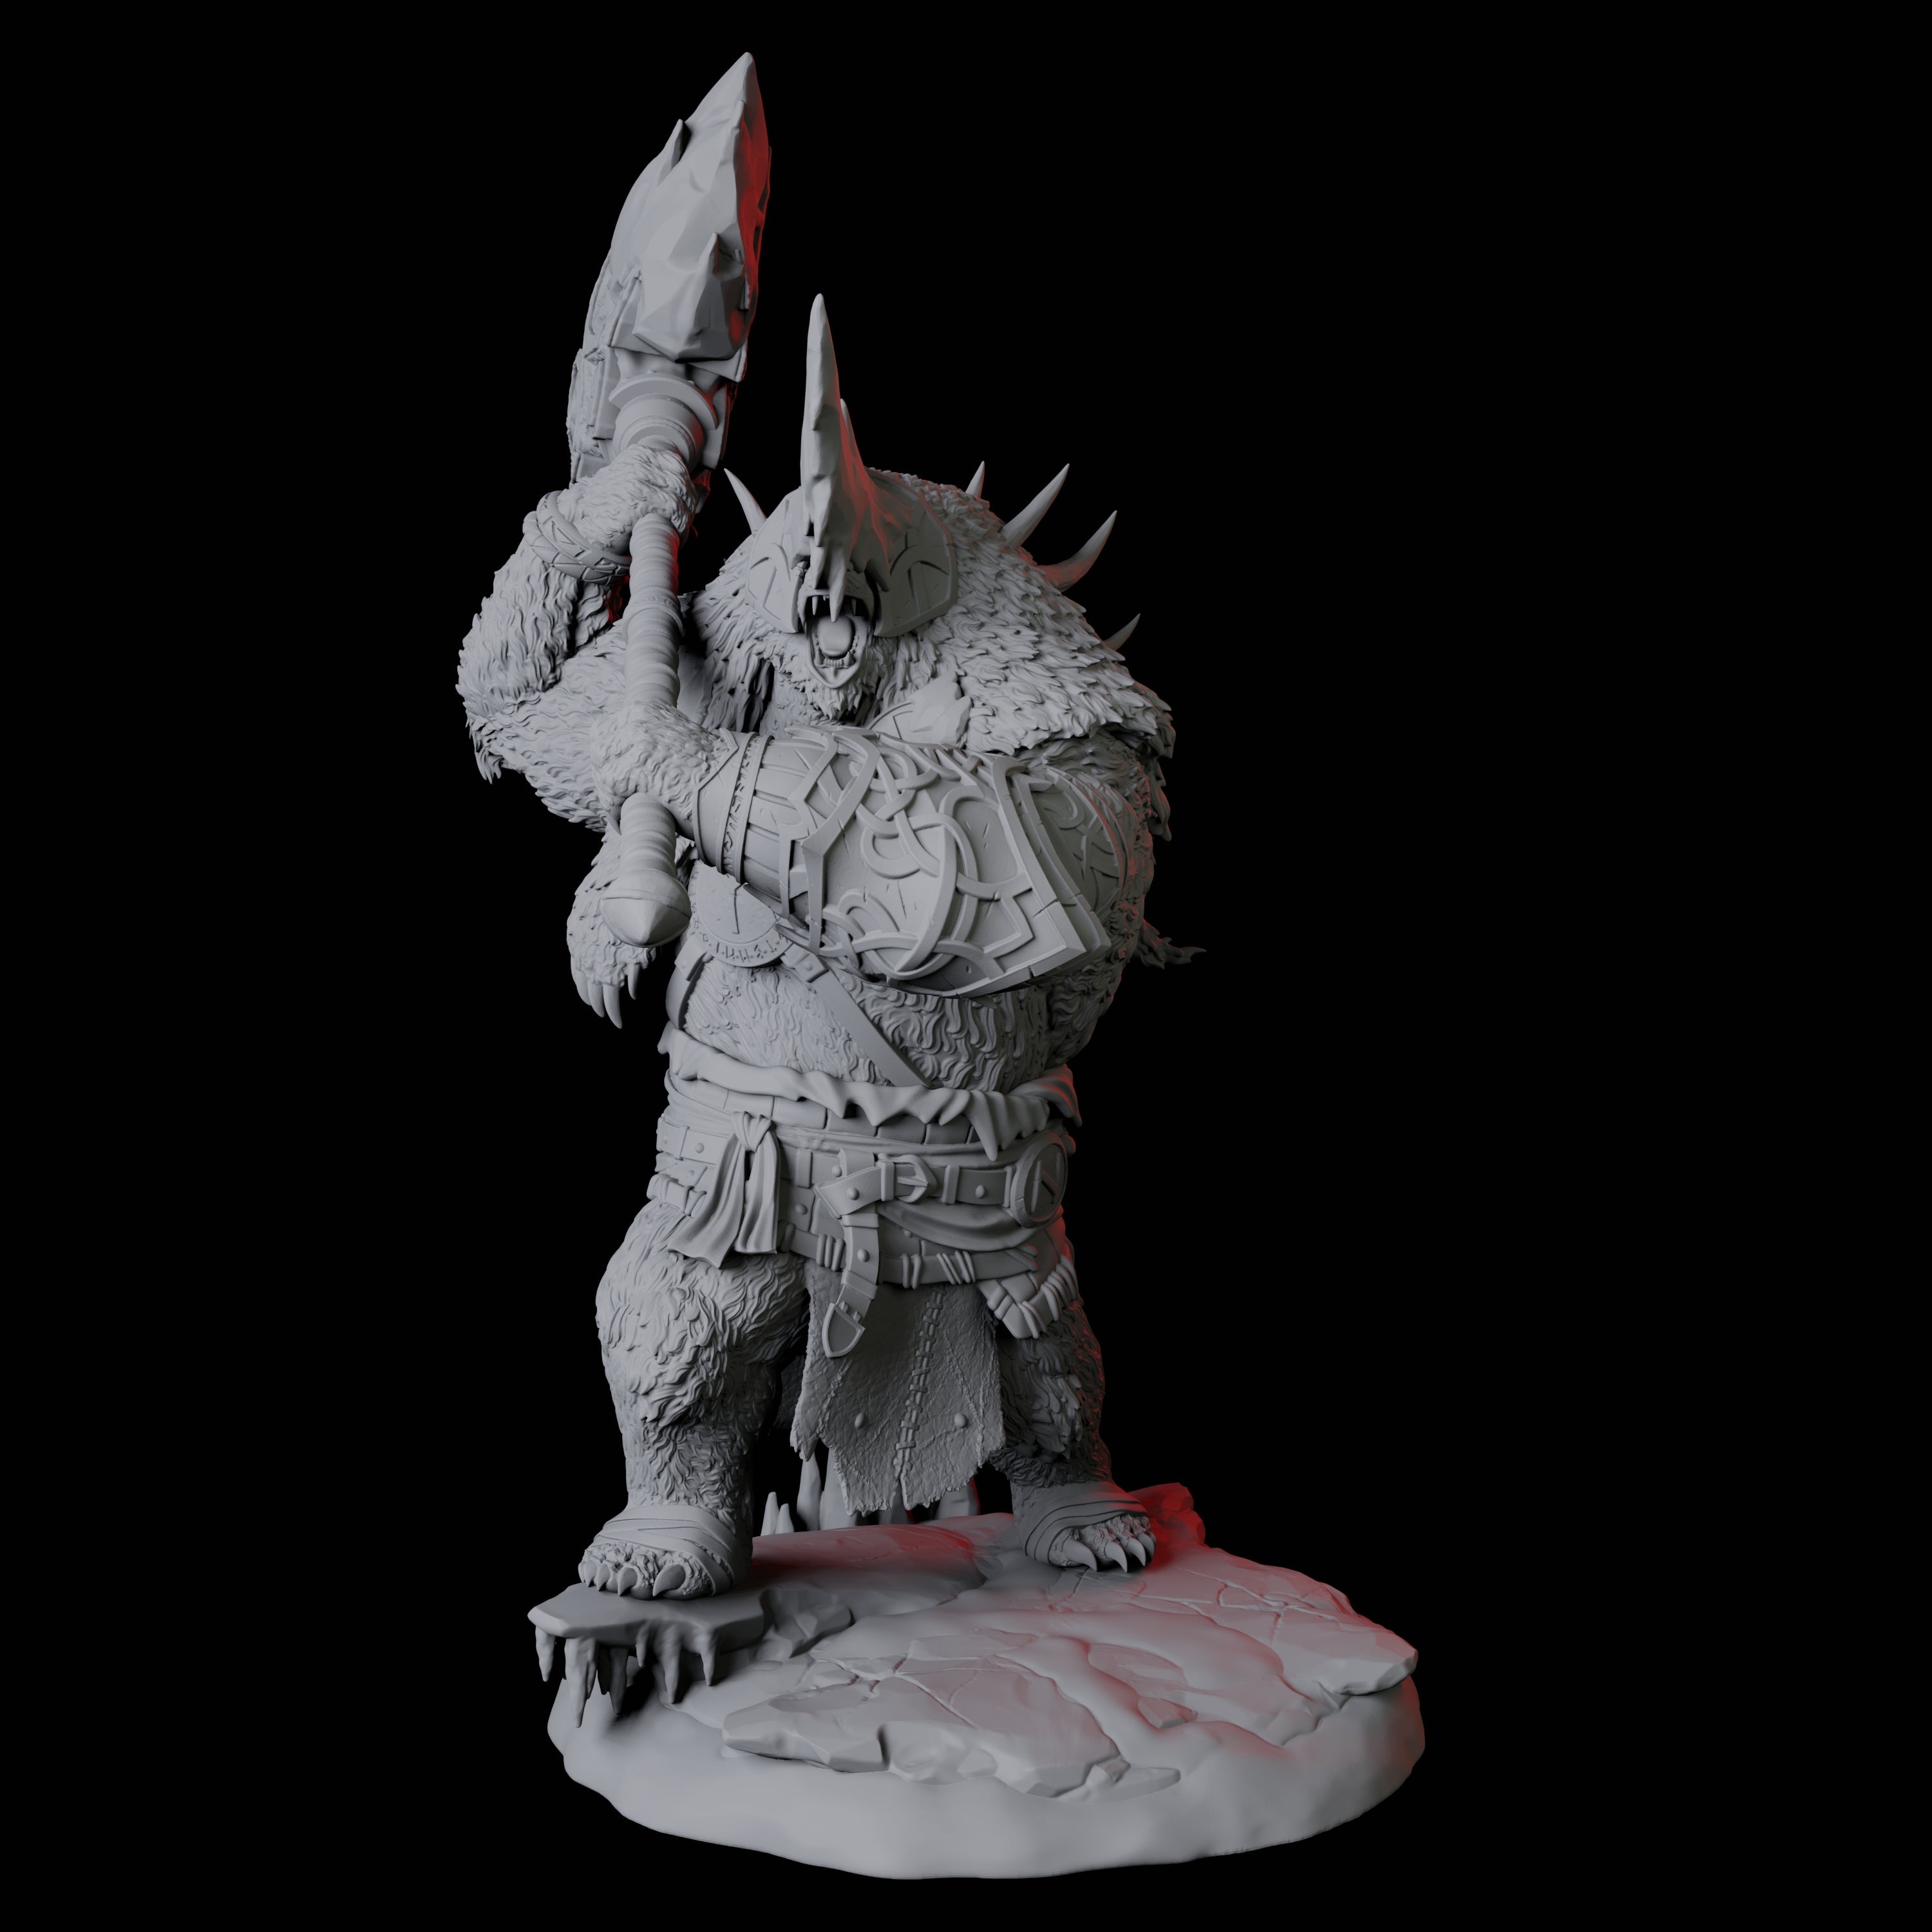 Four Fierce Ursine Warriors Miniature for Dungeons and Dragons, Pathfinder or other TTRPGs